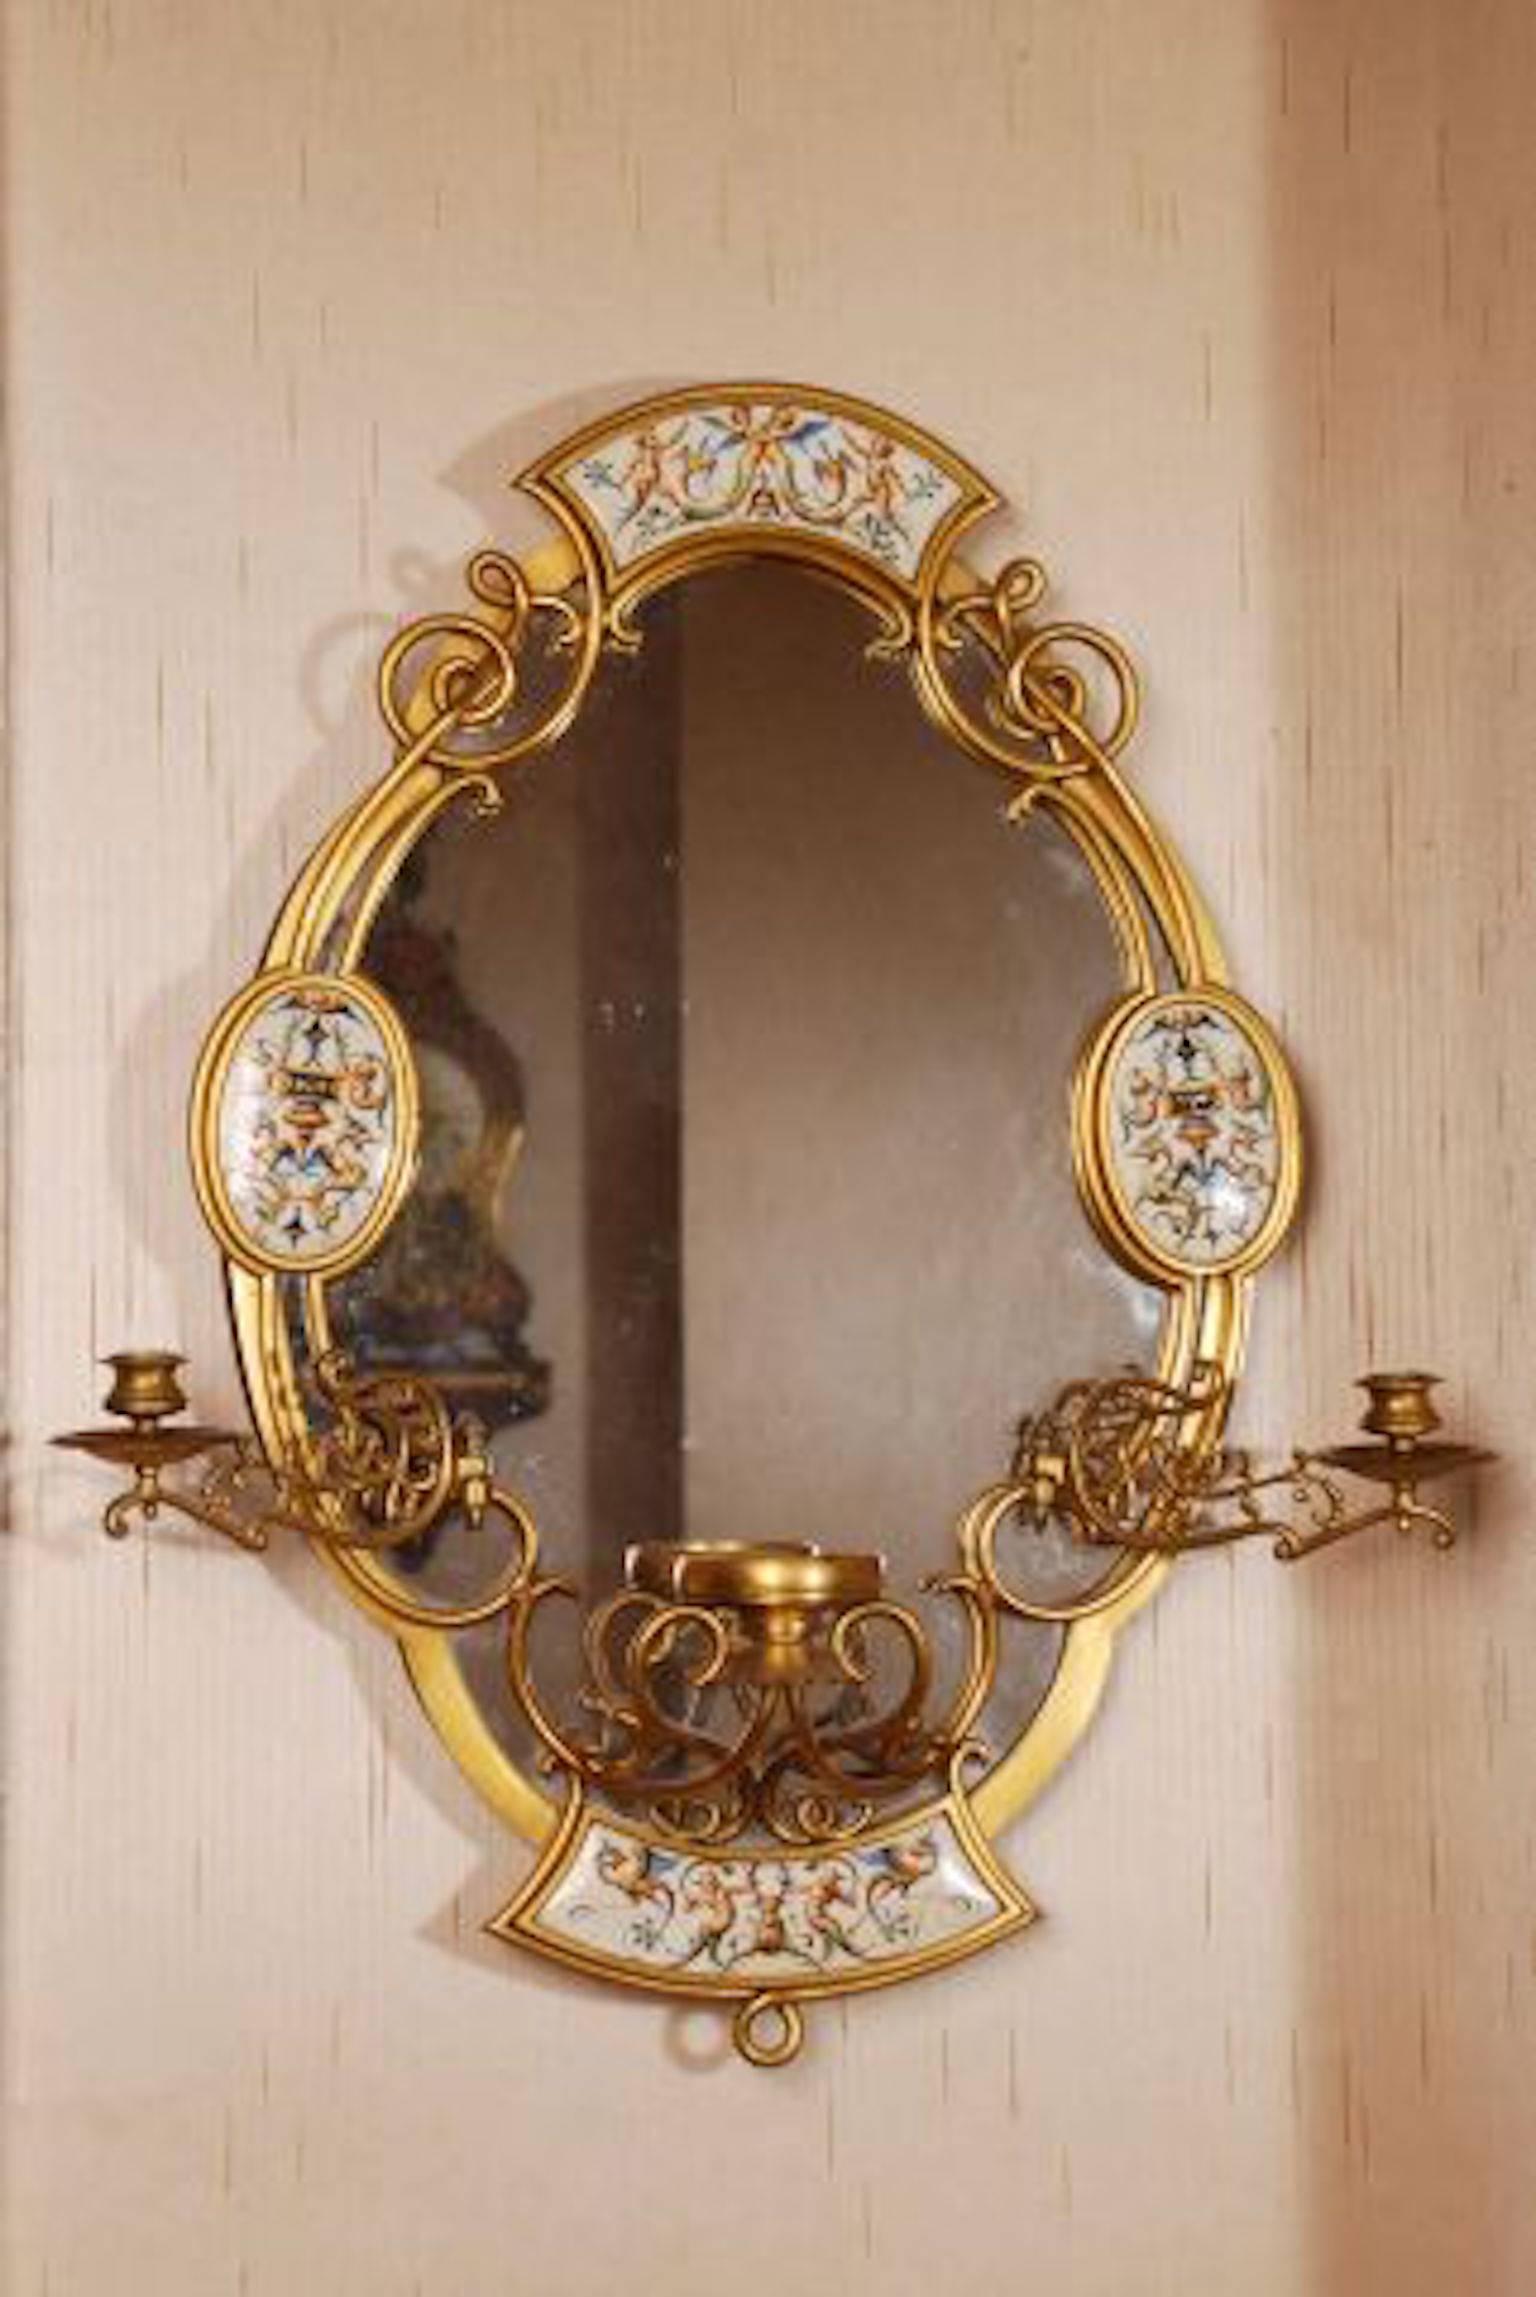 19th century Victorian aesthetic gilt bronze German porcelain mirror
inset with soft paste plaques depicting mythological creatures, with a German porcelain figure of a maiden on shelf, and girandole candle arms. 28